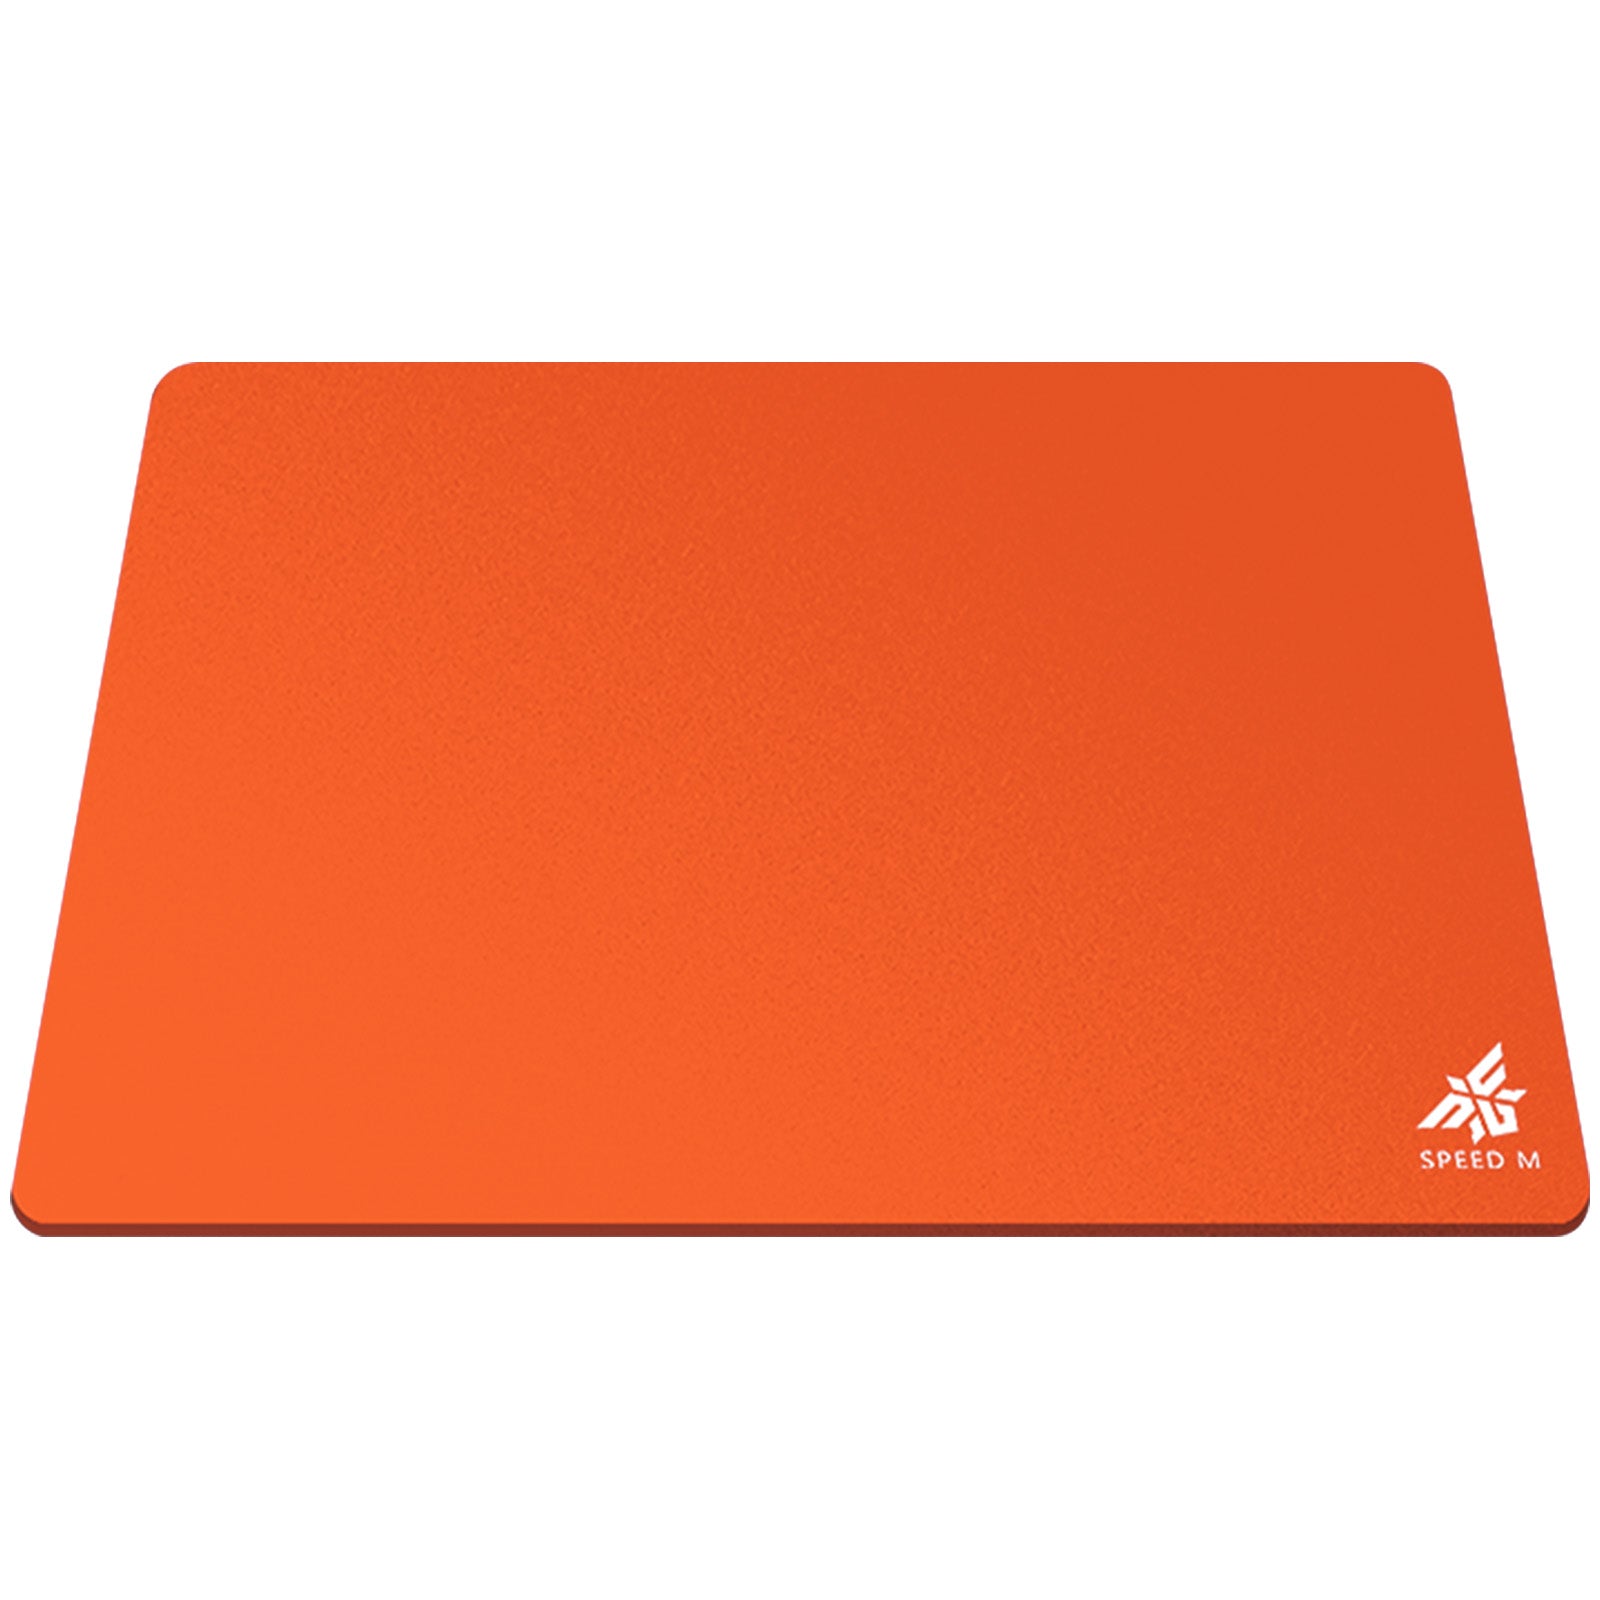 NPET SPEEDM Gaming Mousepad - Resin Surface Hard Gaming Mouse pad,Balanced Control & Speed, No Smell Waterproof Mouse Mat for Esports Gamers [Hard/Fast] Orange, Large